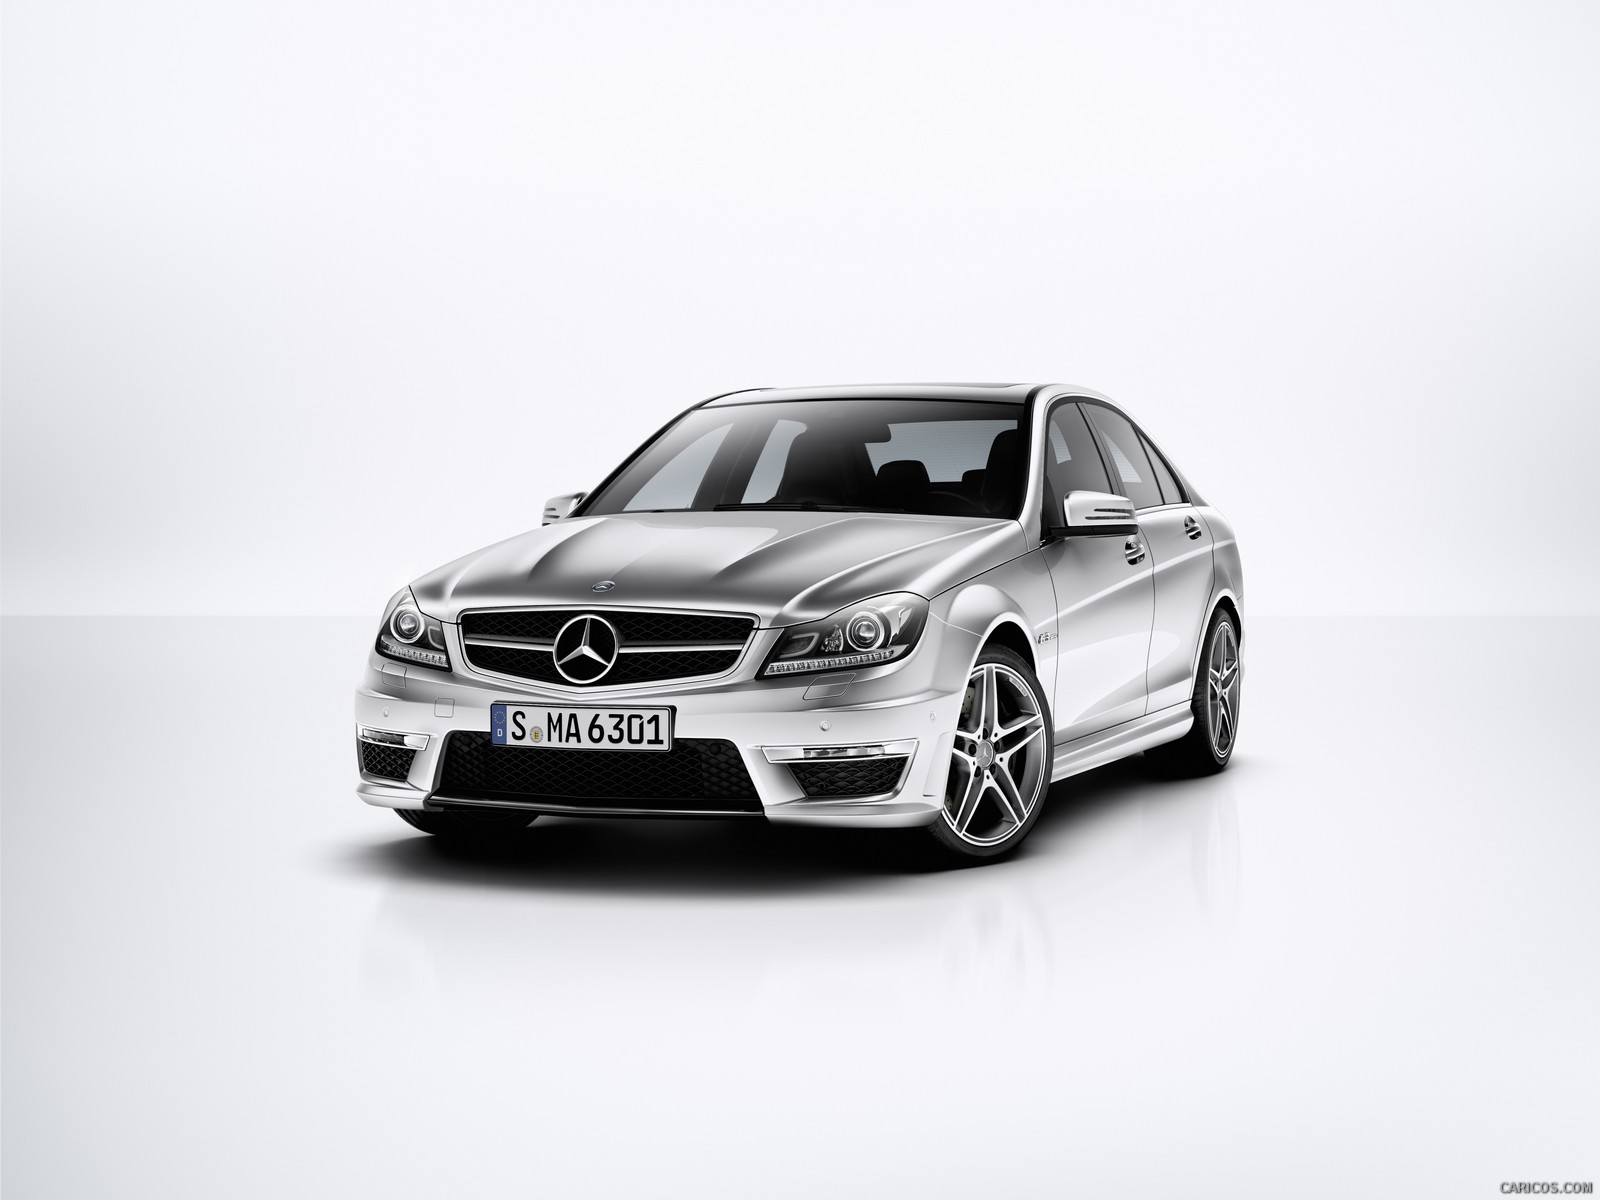 Mercedes-Benz C63 AMG (2012)  - Front Angle , #20 of 22